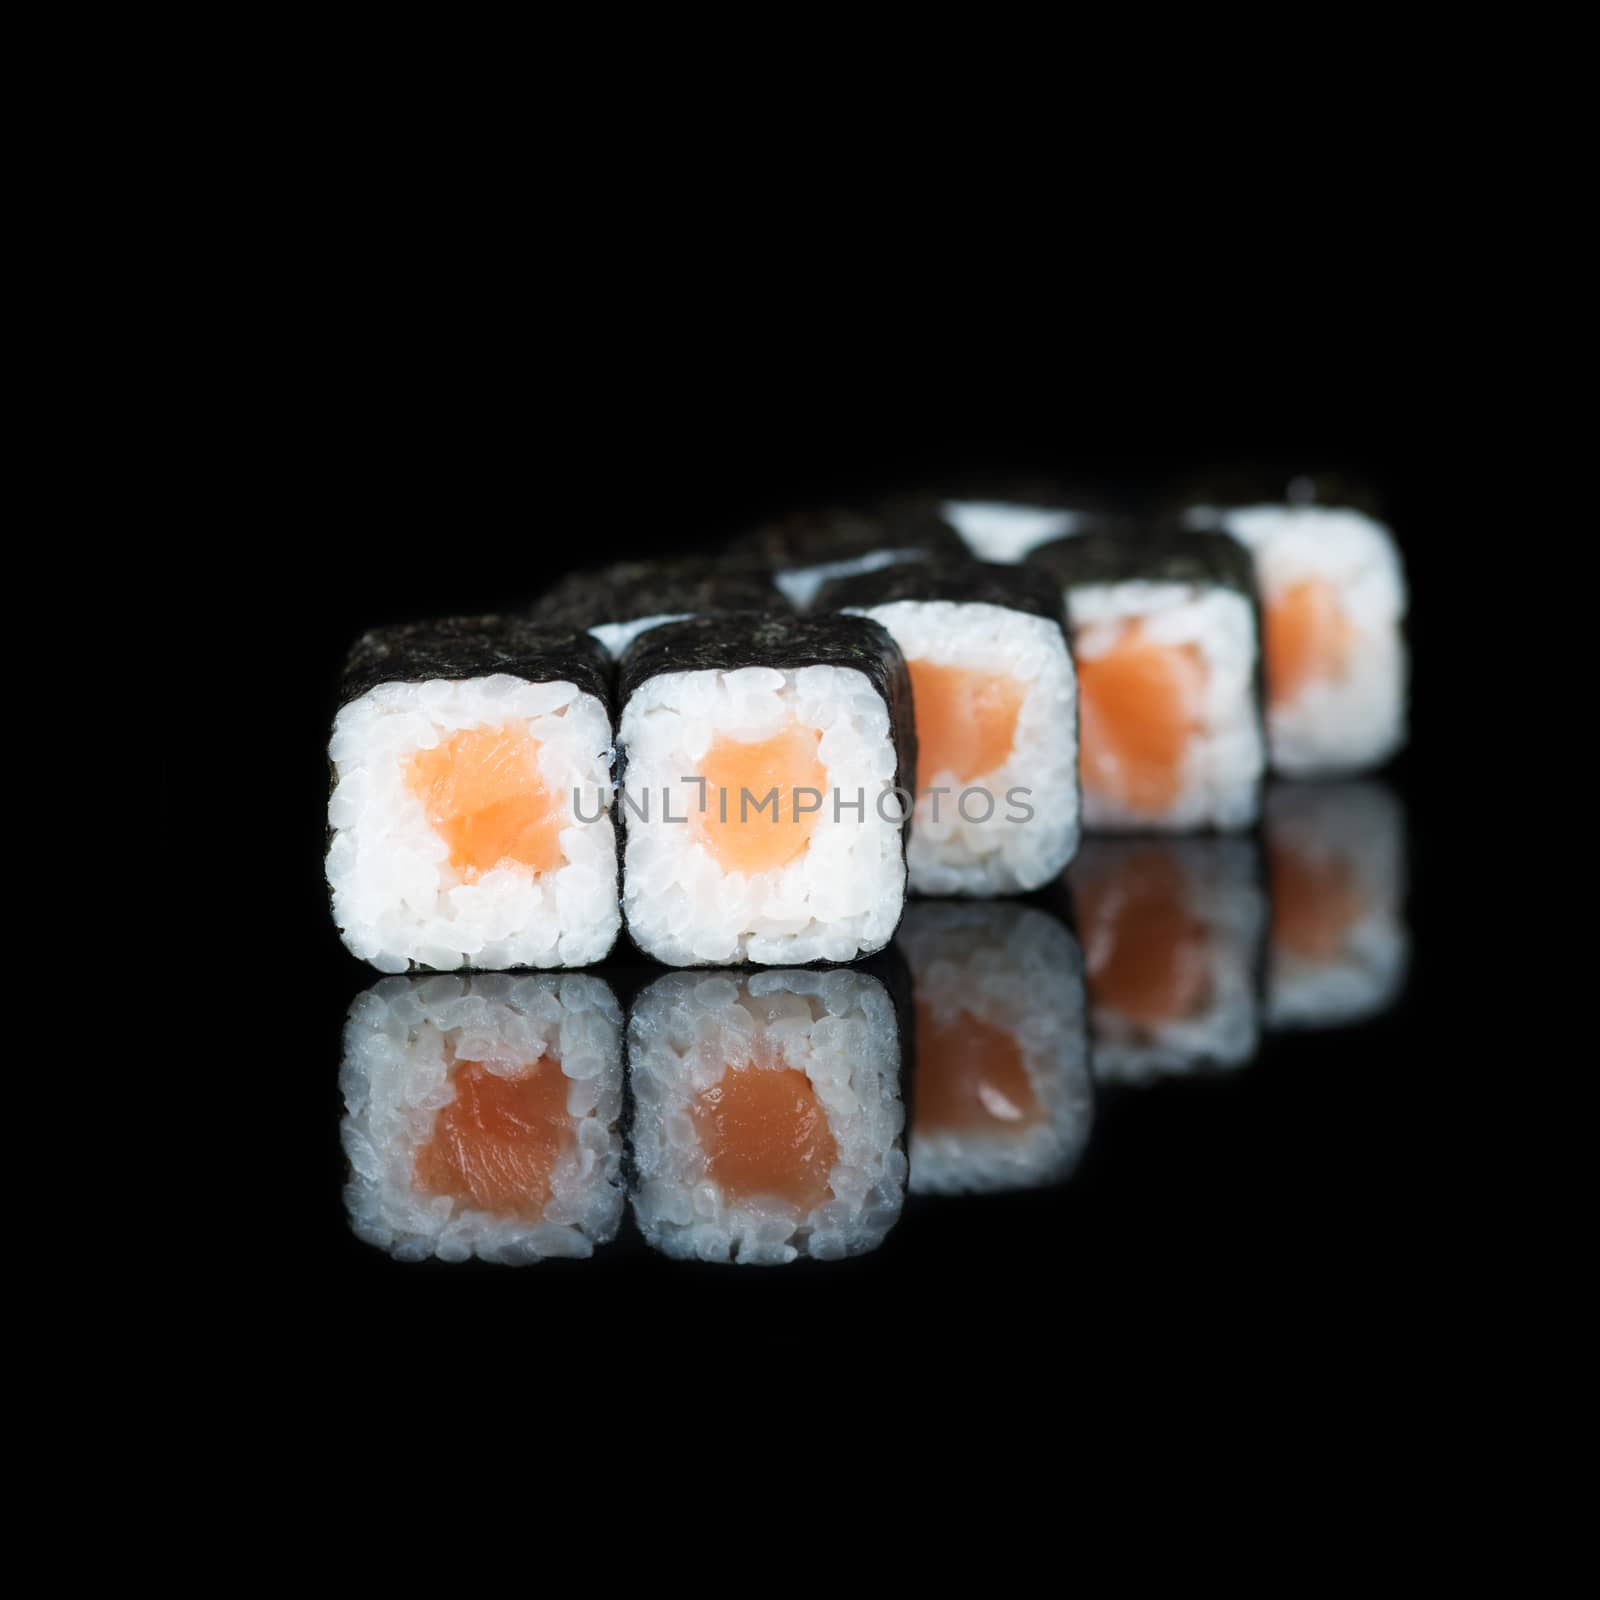 Sushi rolls with salmon by kzen